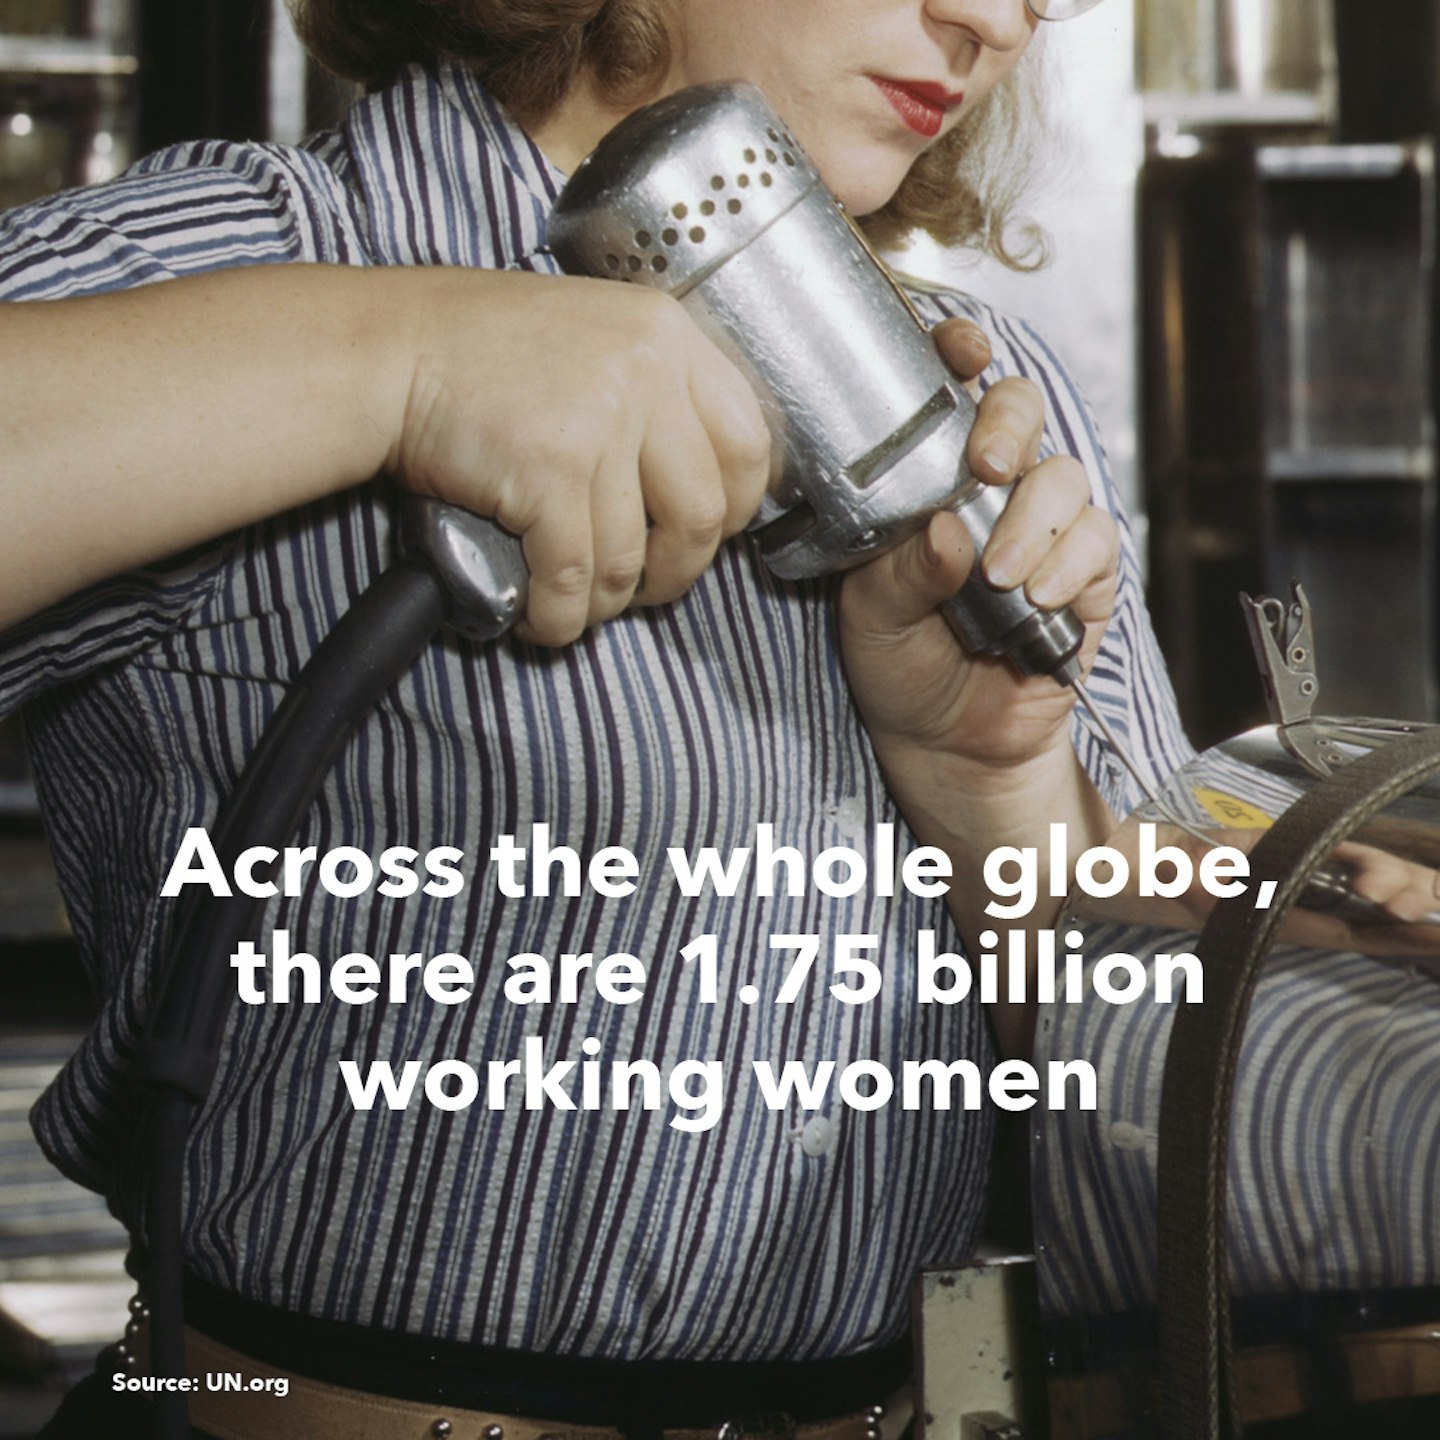 Facts about women around the world